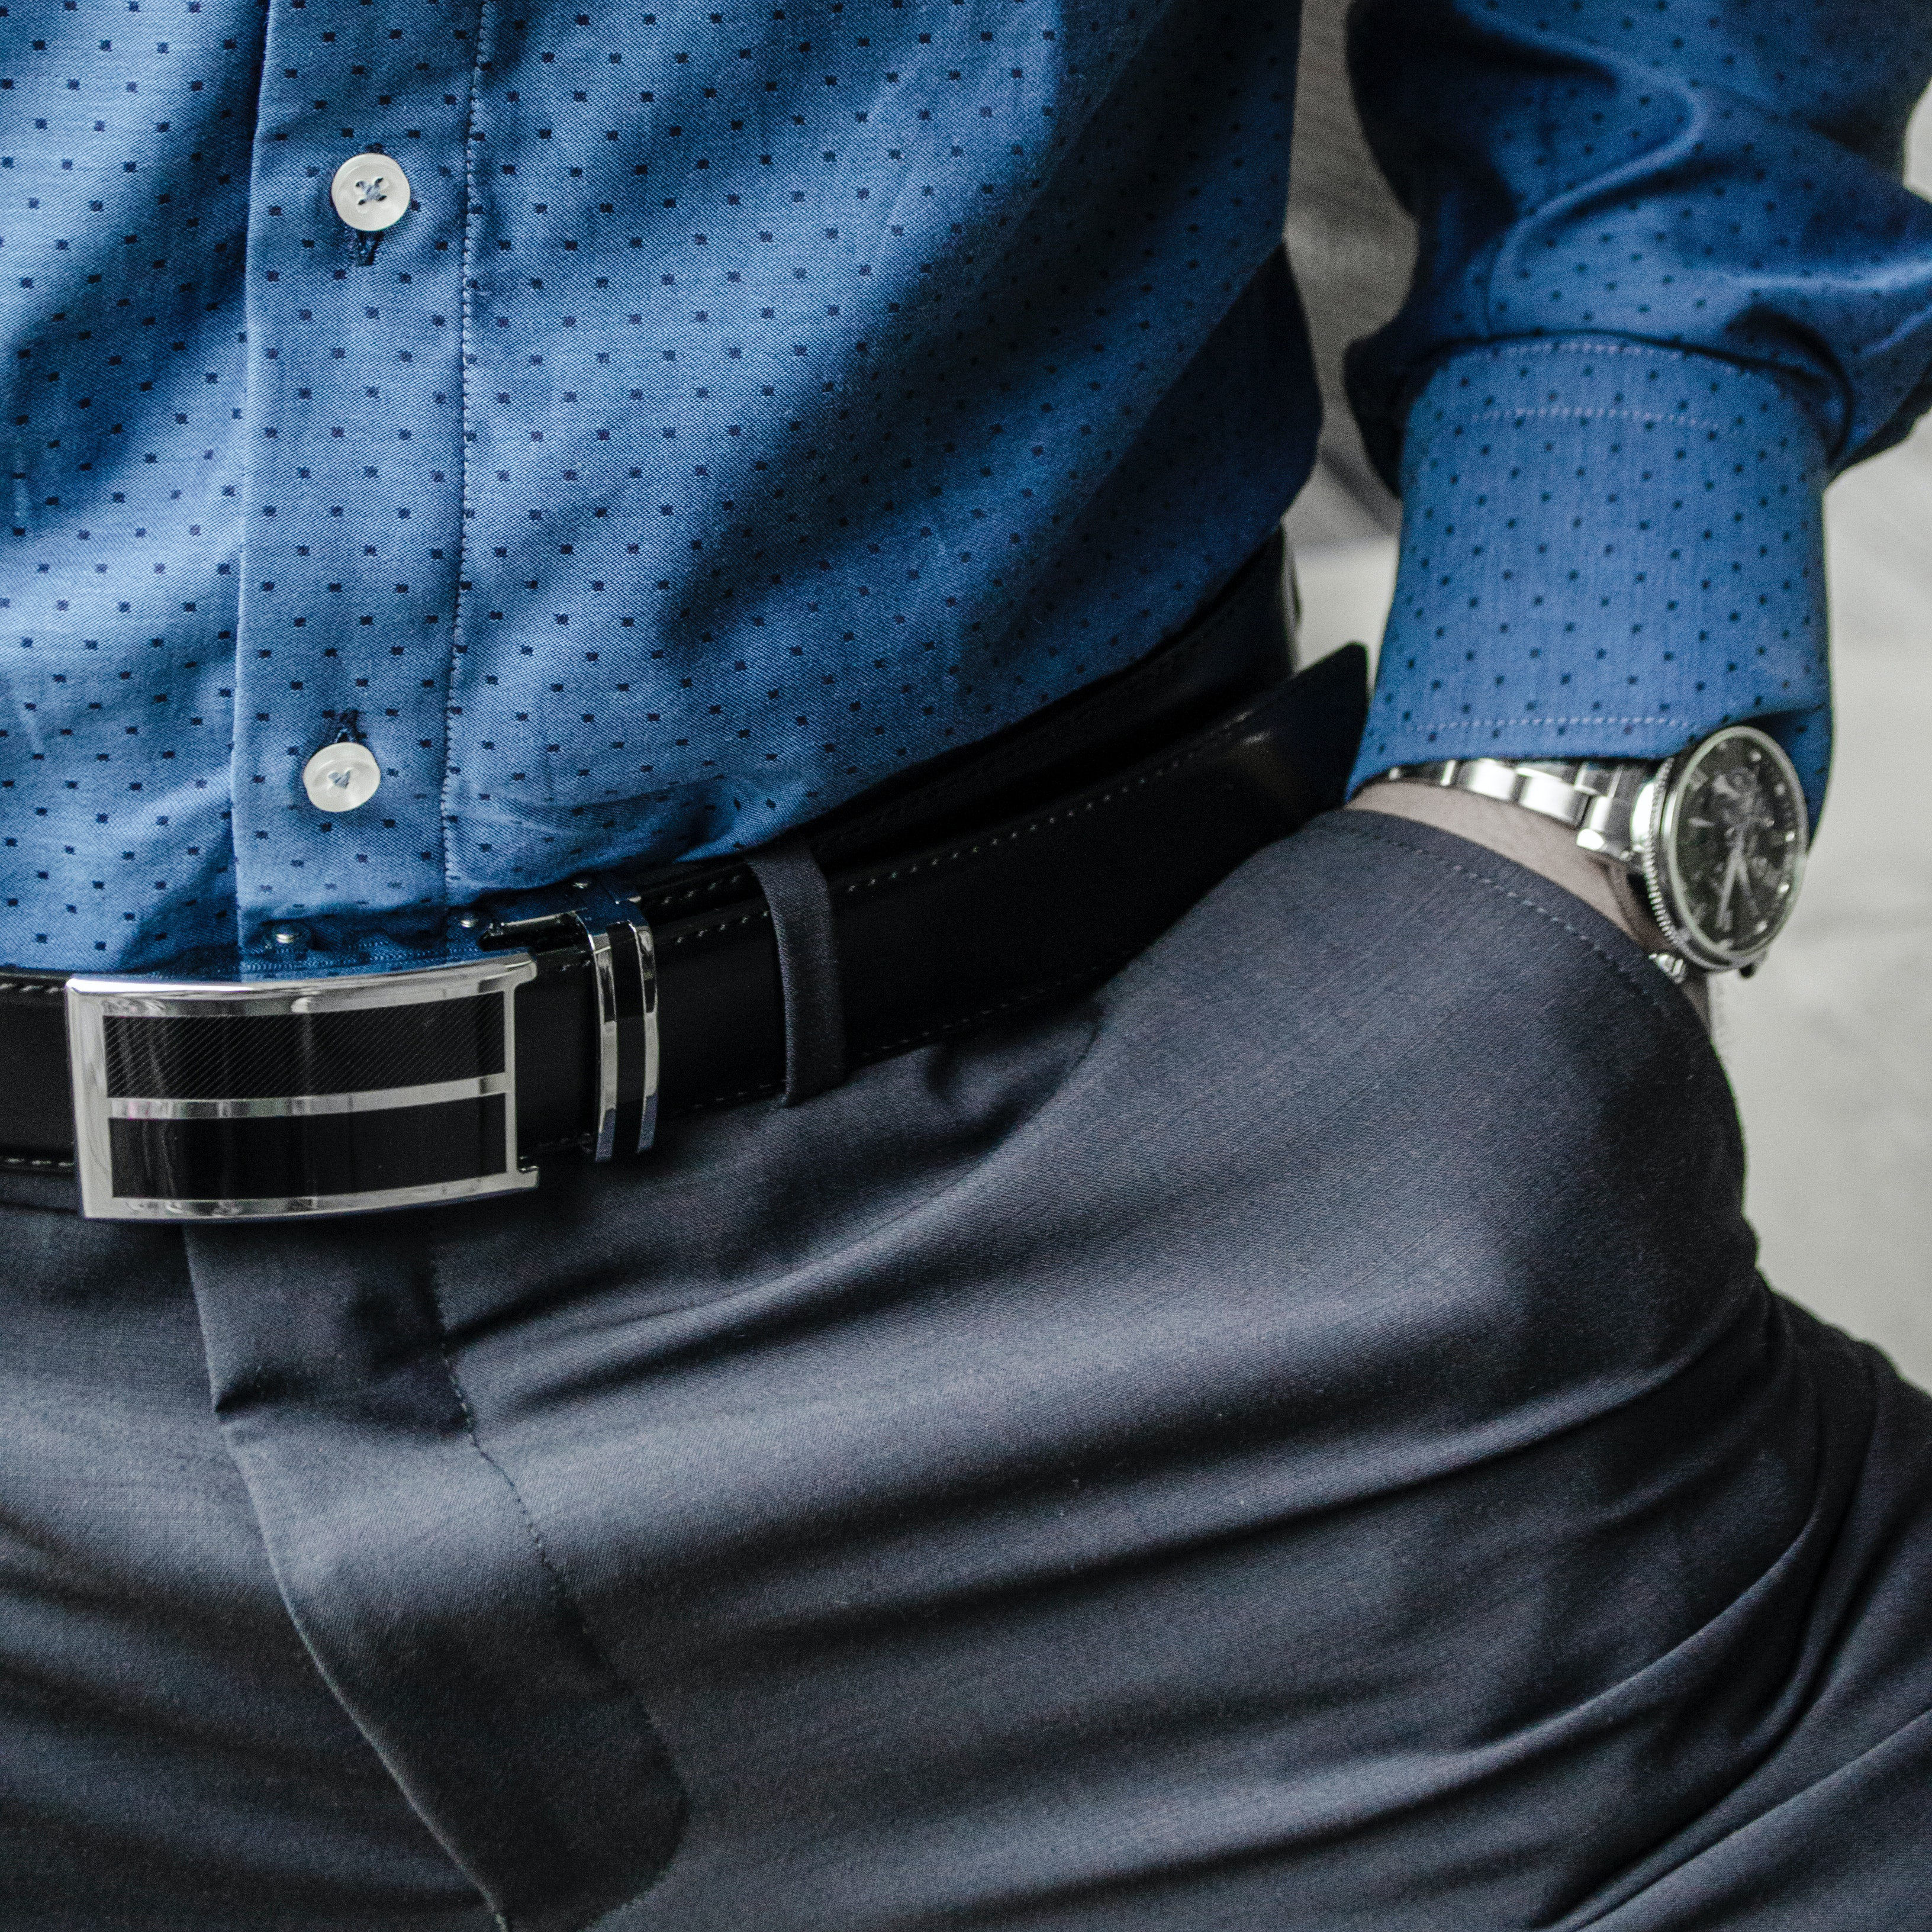 Tips on How to Wear a Belt with Your Suit